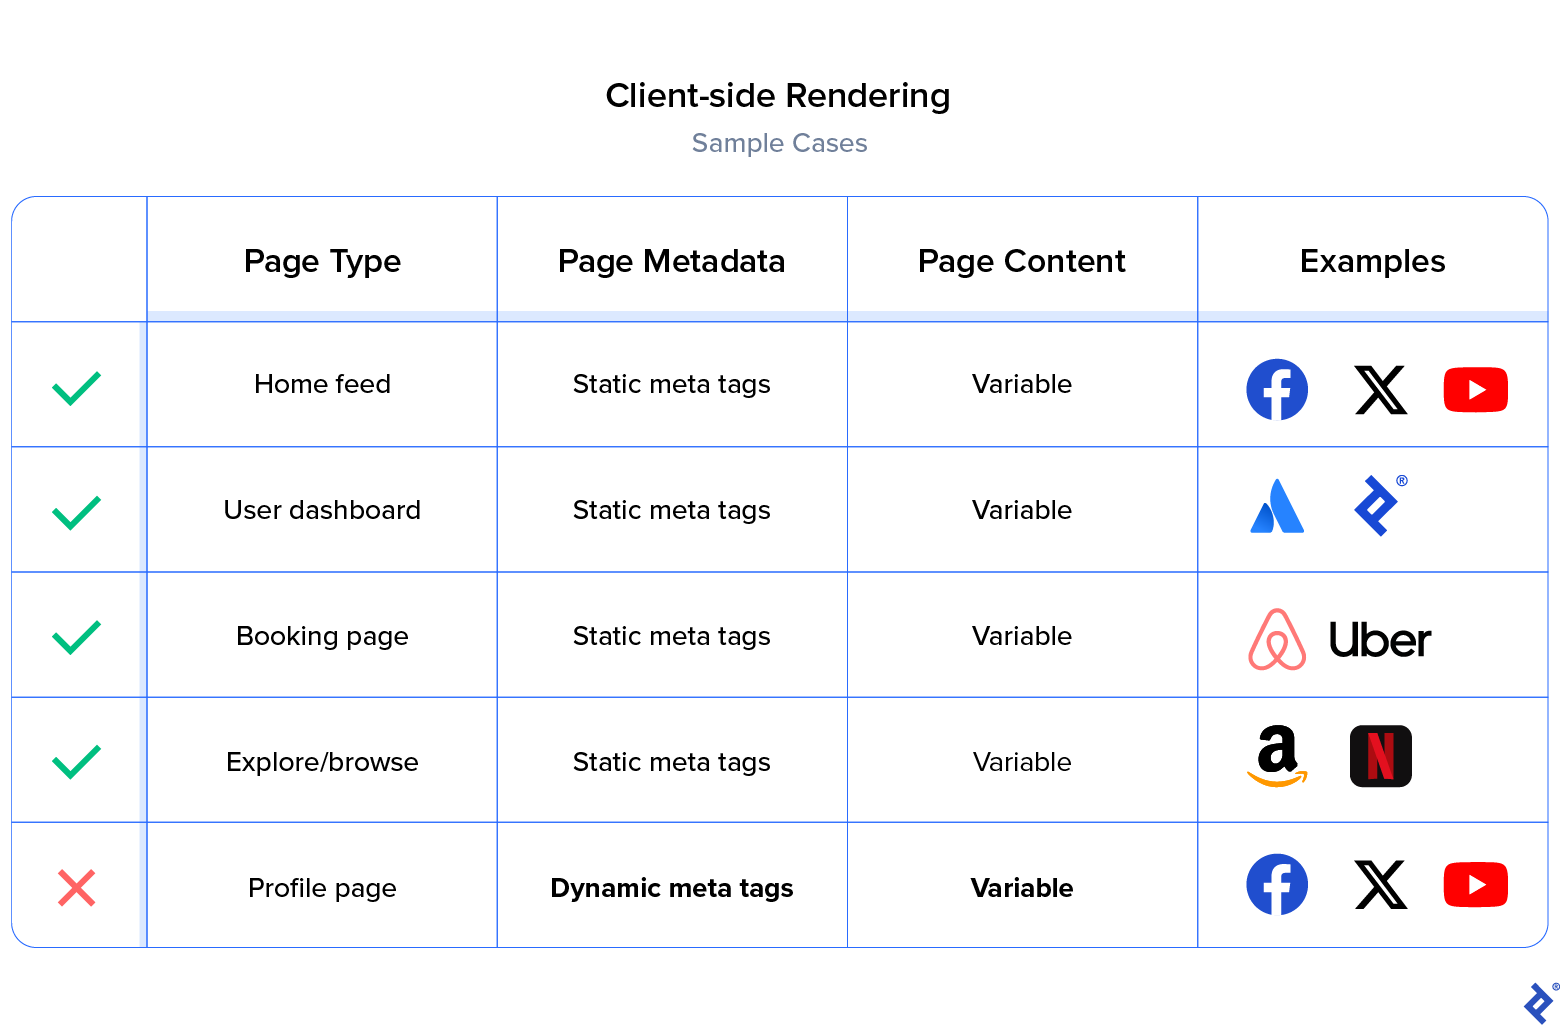 Examples of client-side rendering featuring page type, metadata, content, including Facebook, YouTube, Amazon, and Netflix.